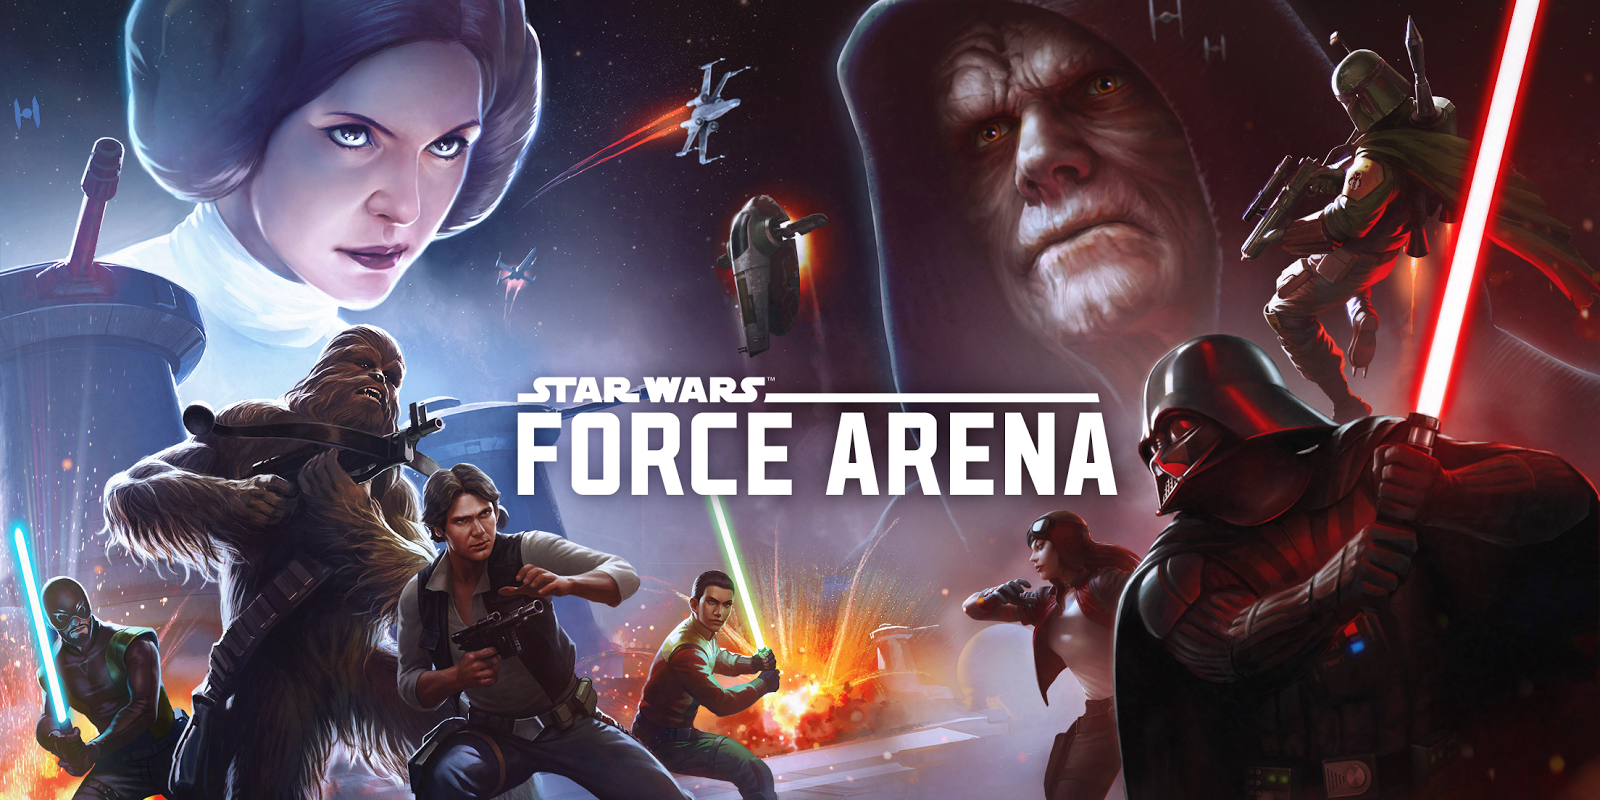 EA shutting down four free-to-play PC games, but Star Wars: The